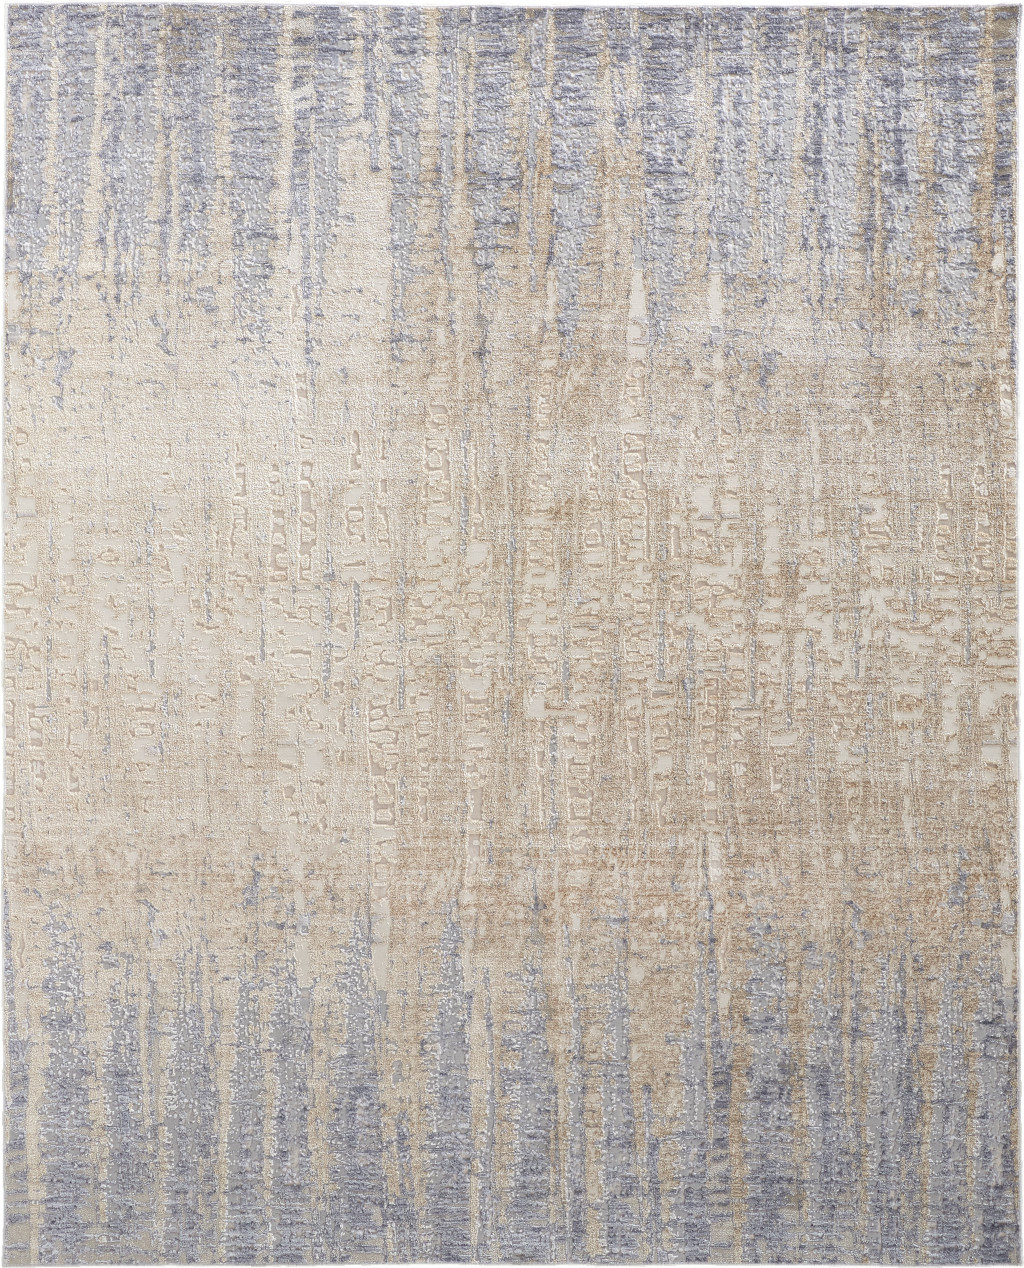 5' X 8' Tan Brown And Blue Abstract Power Loom Distressed Area Rug-514186-1